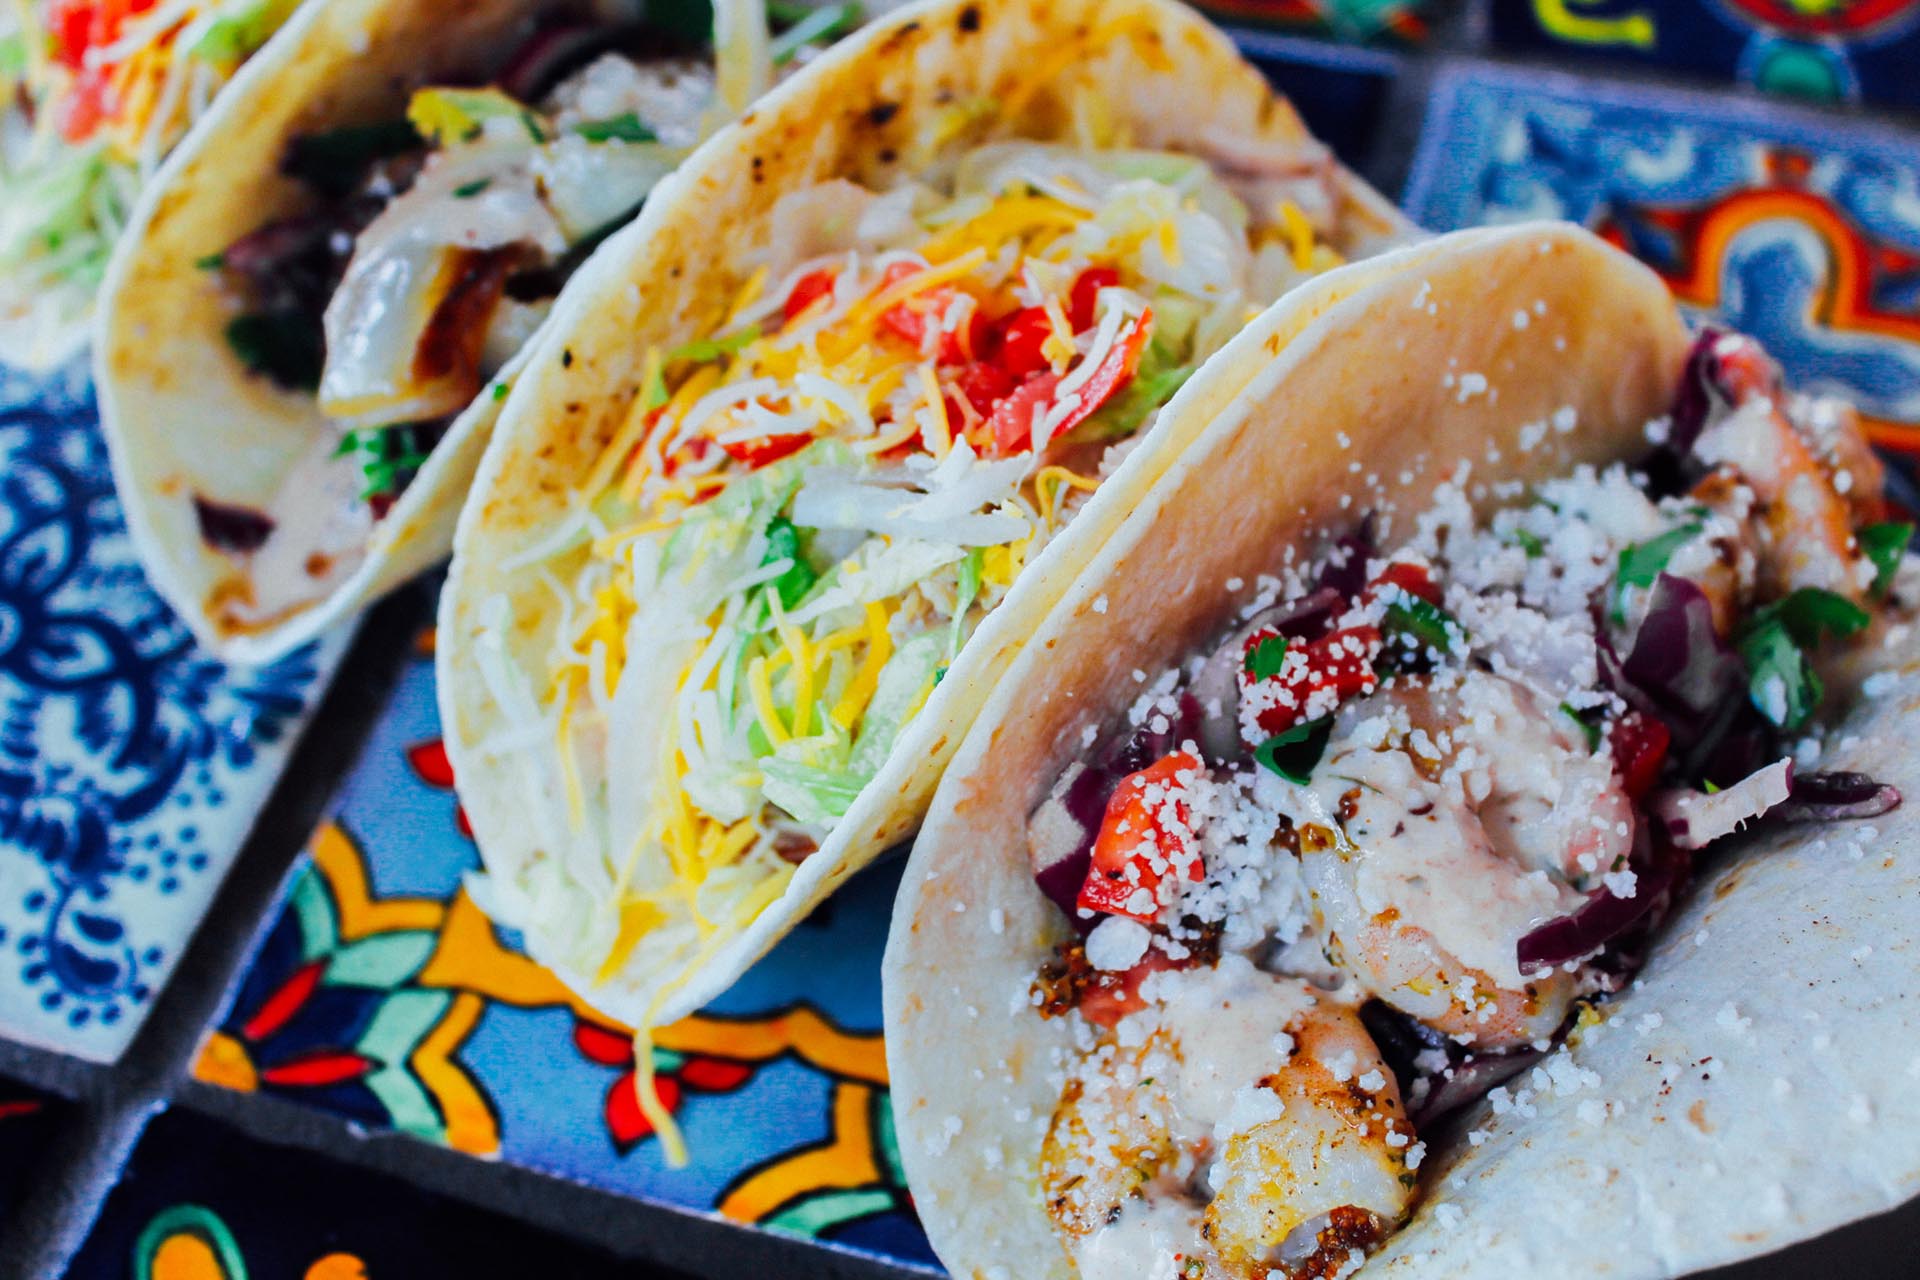 20 places to get a taco in Tampa Bay